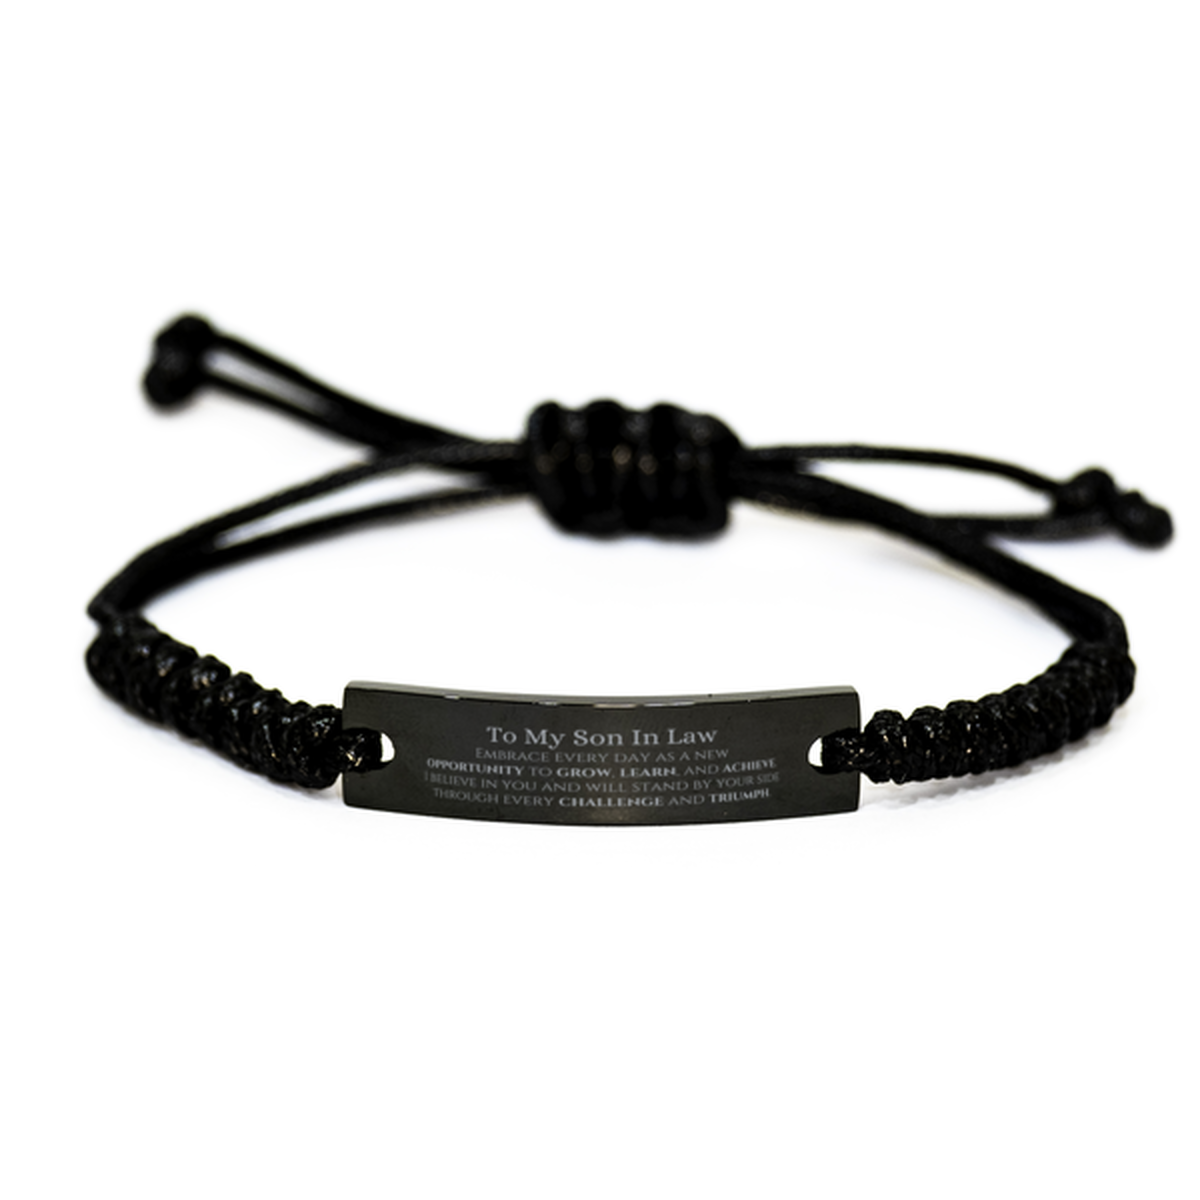 To My Son In Law Gifts, I believe in you and will stand by your side, Inspirational Black Rope Bracelet For Son In Law, Birthday Christmas Motivational Son In Law Gifts